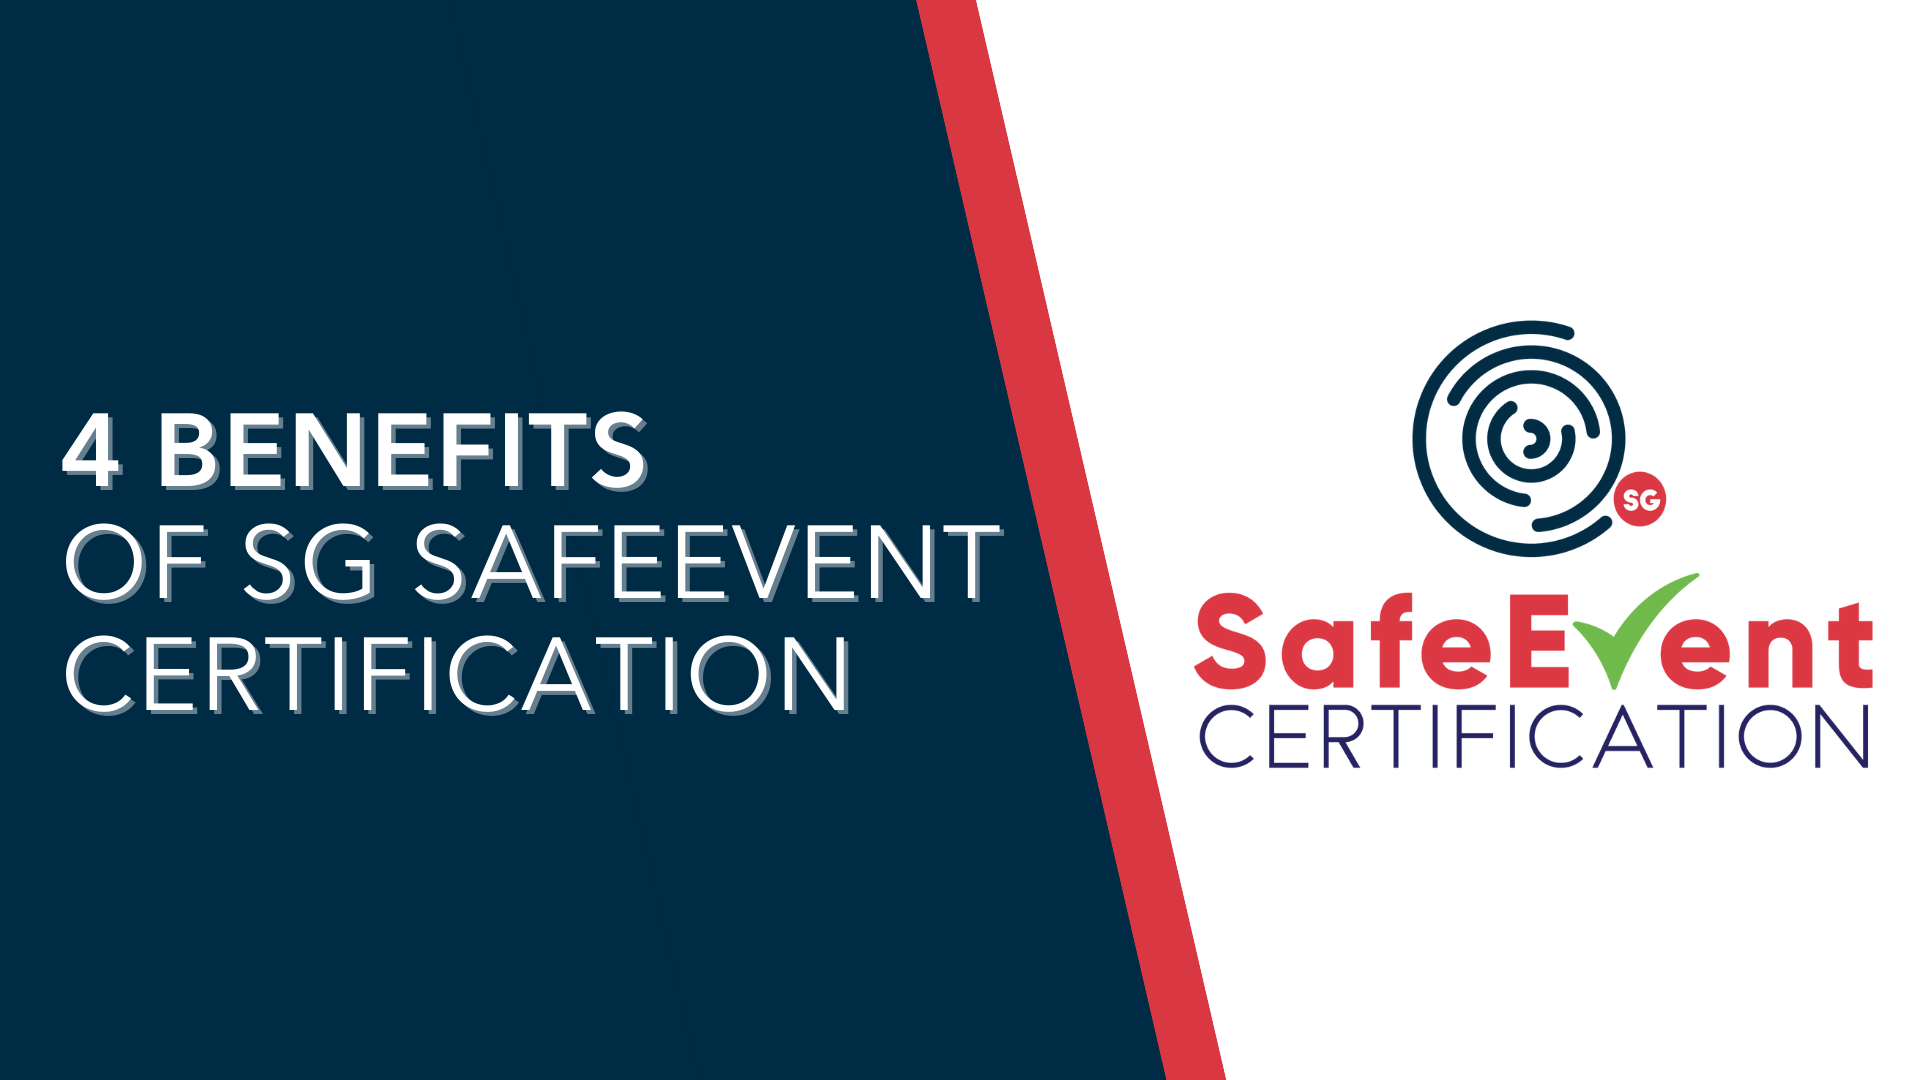 4 benefits of SG SafeEvent Certification